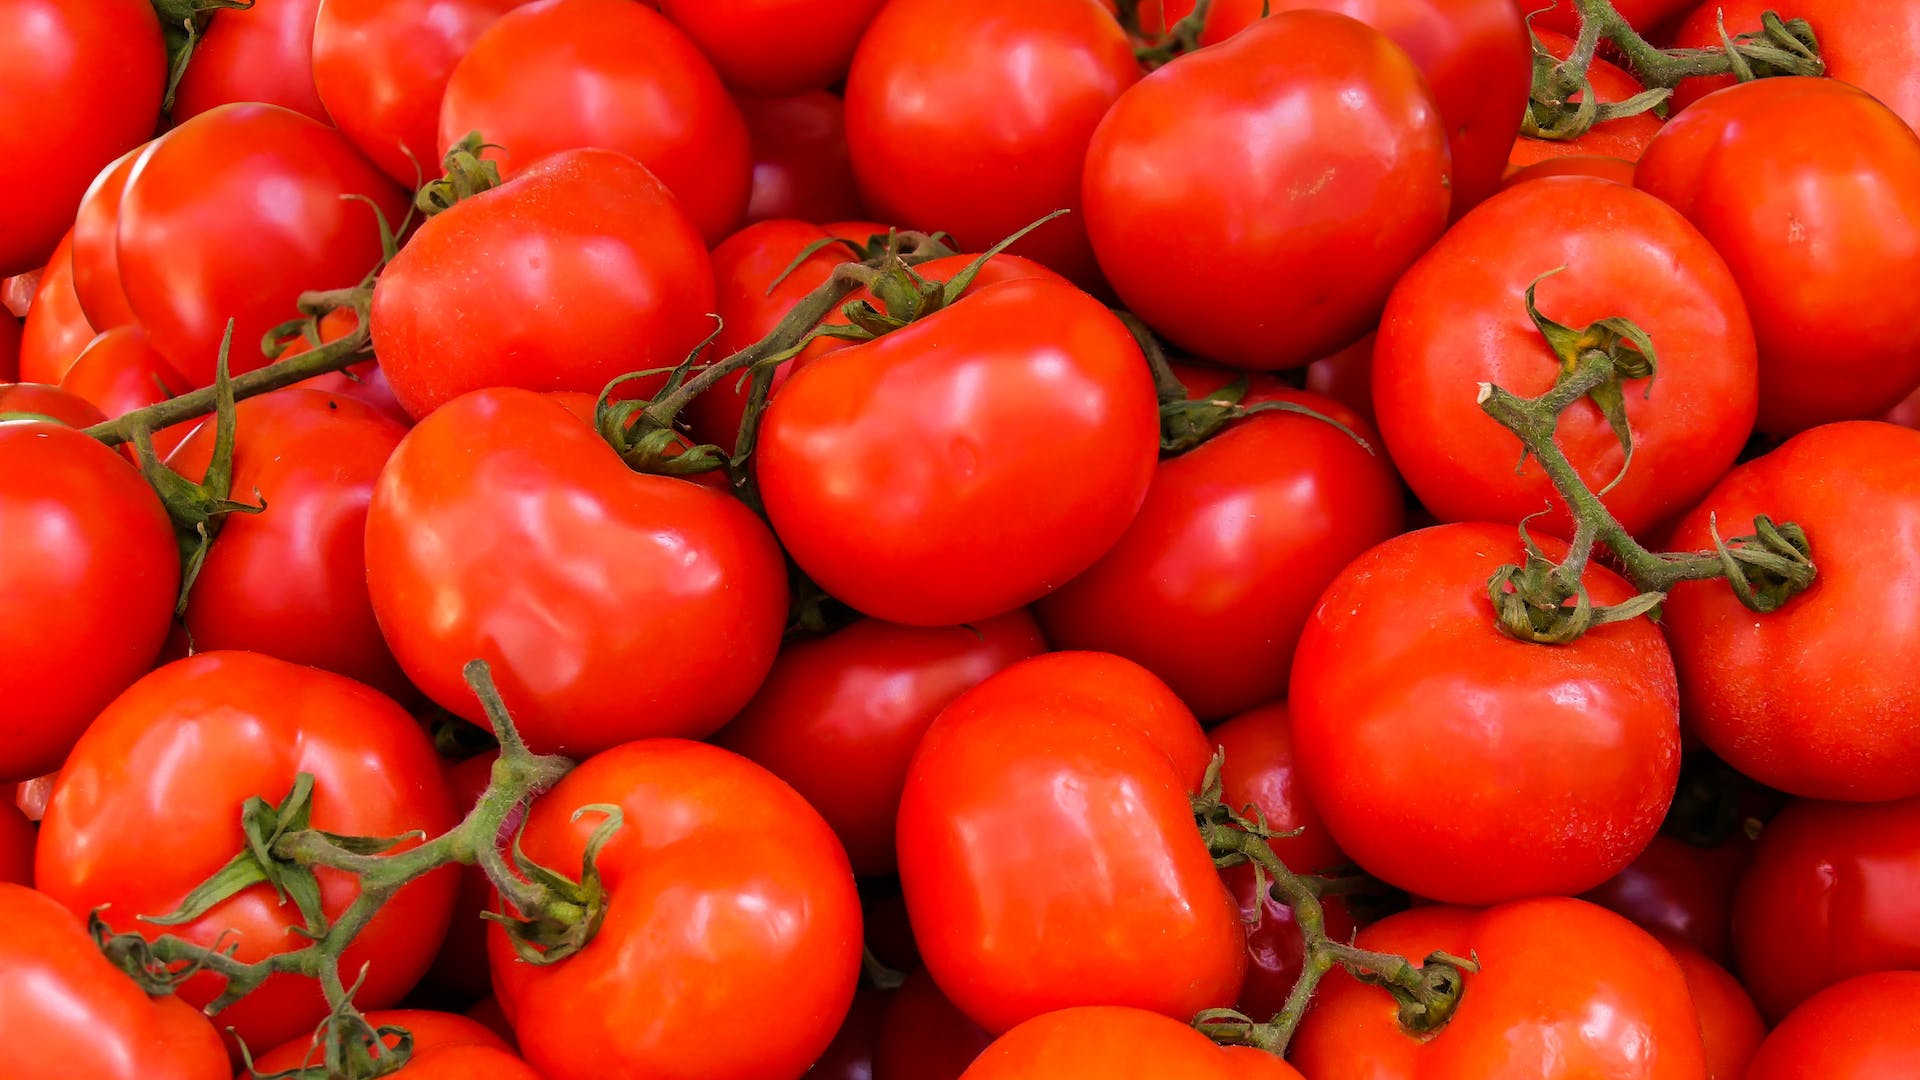 The “Gold” for Health – Red Gold Tomatoes from Europe